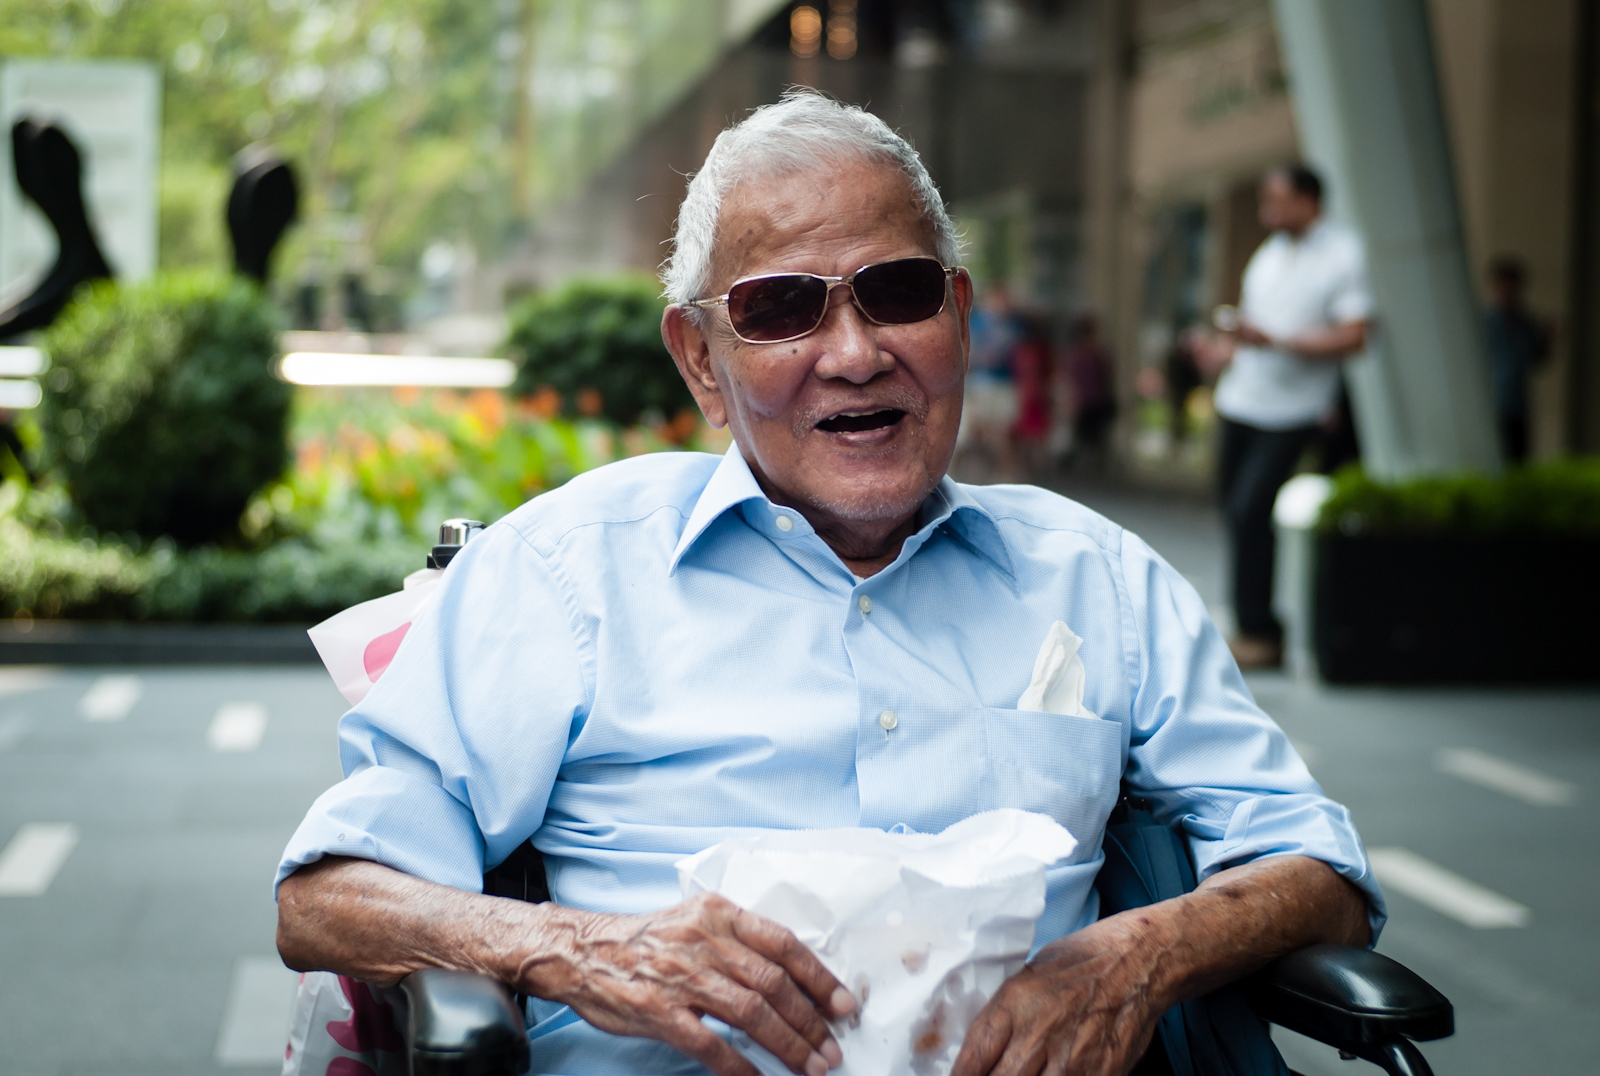 Elderly man wearing sunglasses and sitting in a wheel chair